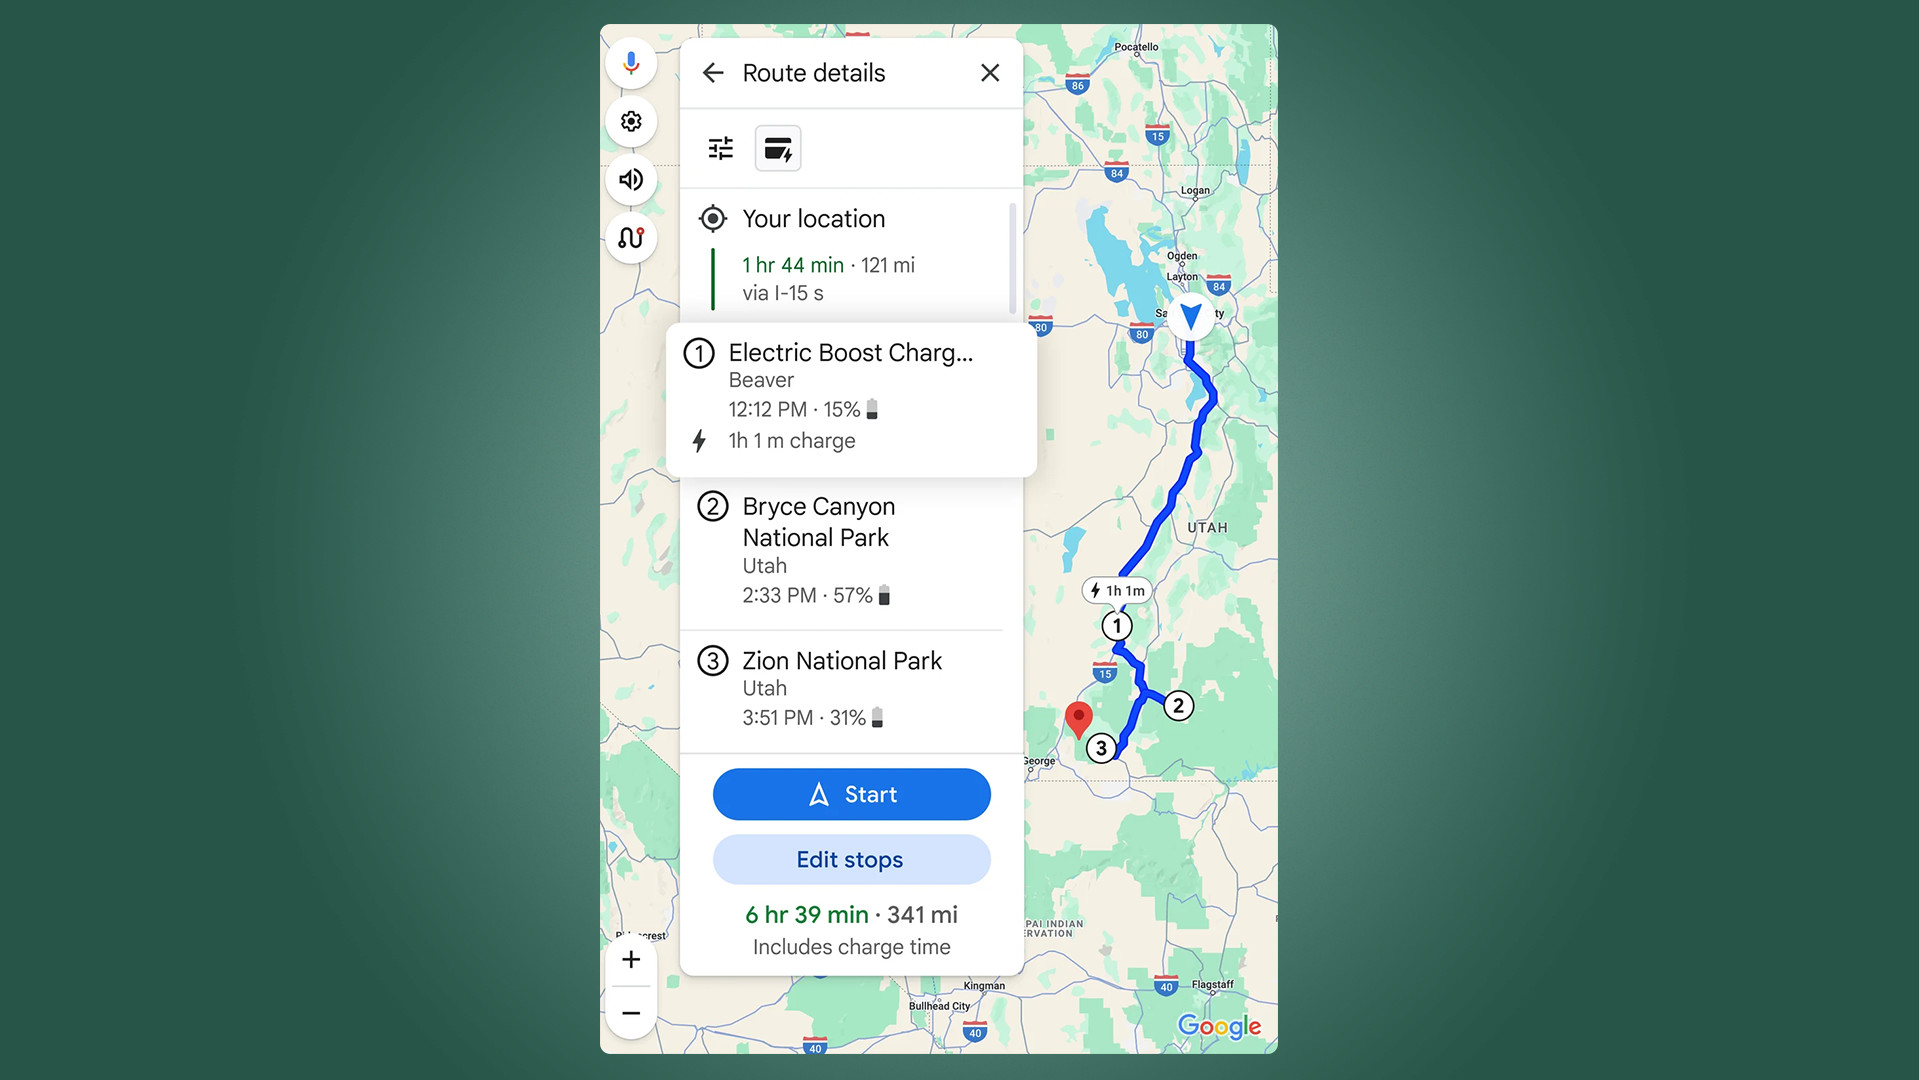 Charging stations appearing on Google Maps trip